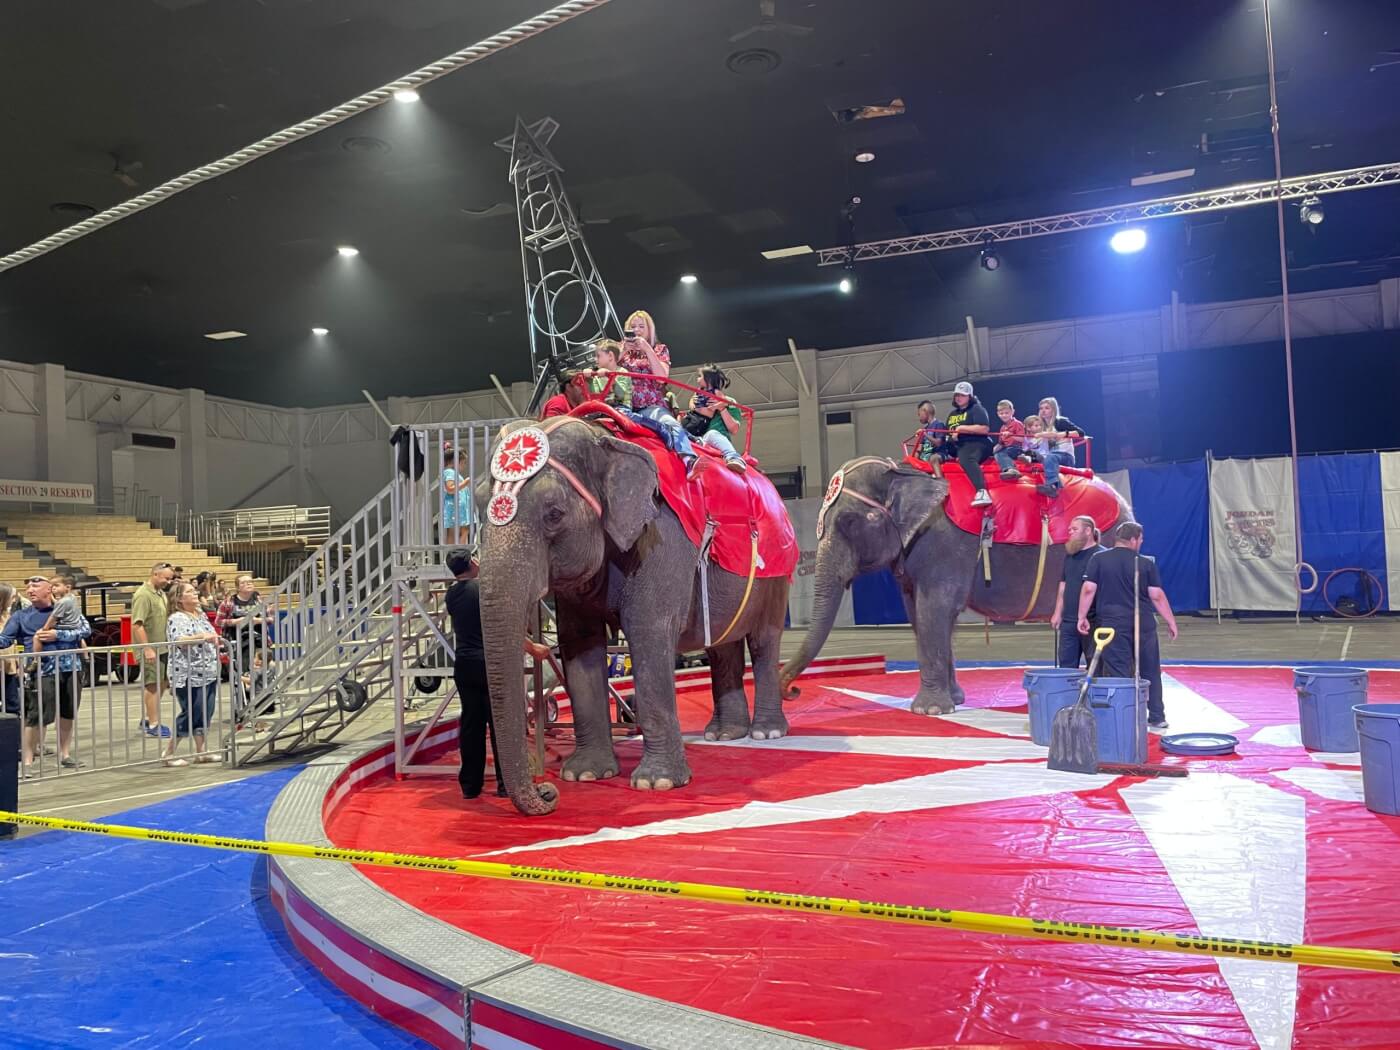 elephants dressed in costumes forced to give rides to humans at a circus provided by Carson & Barnes